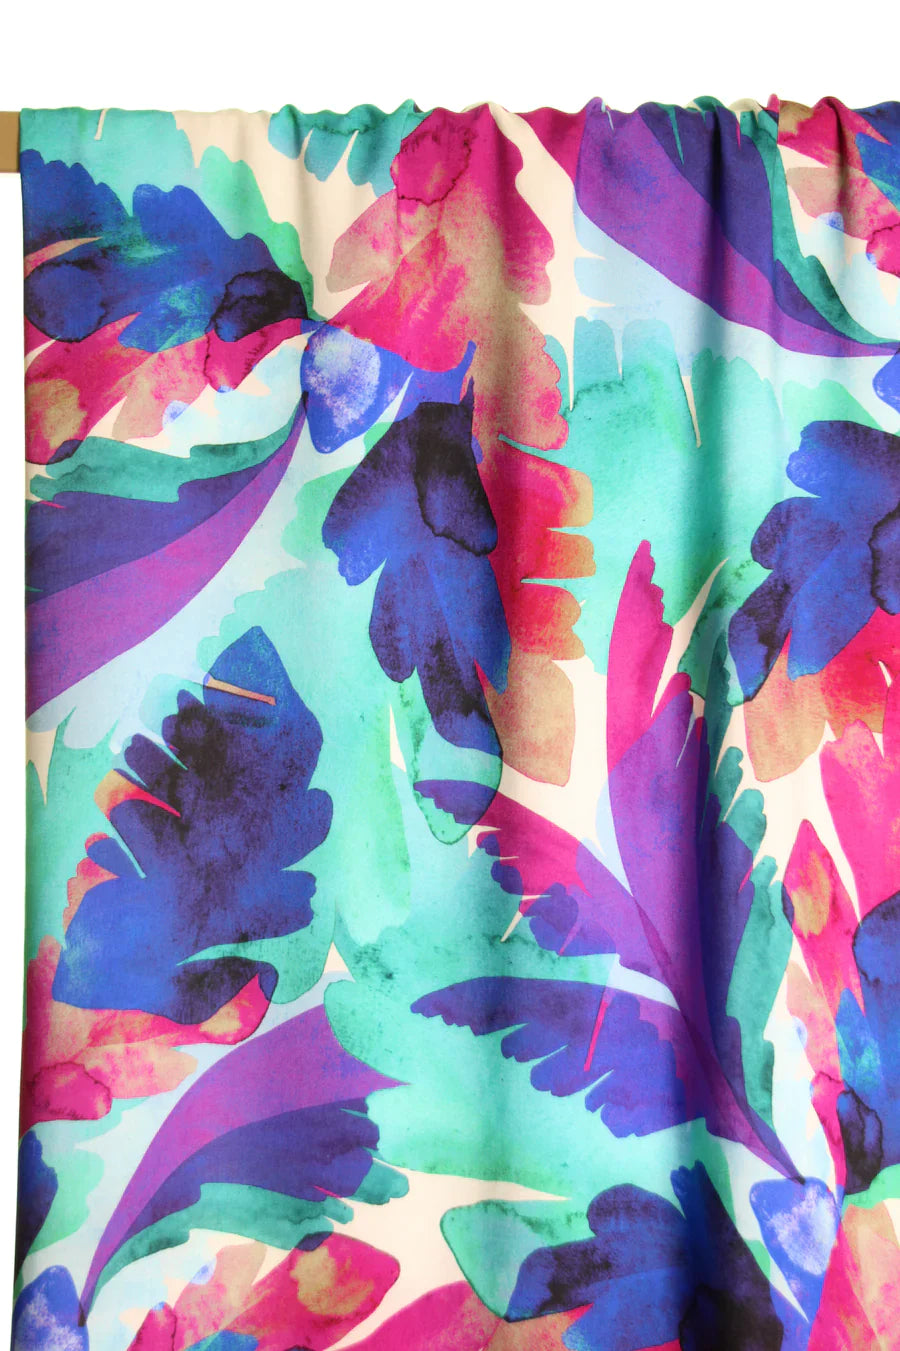 REMNANT 1.36 Metres - Atelier Jupe - Bright and Colourful Viscose Fabric